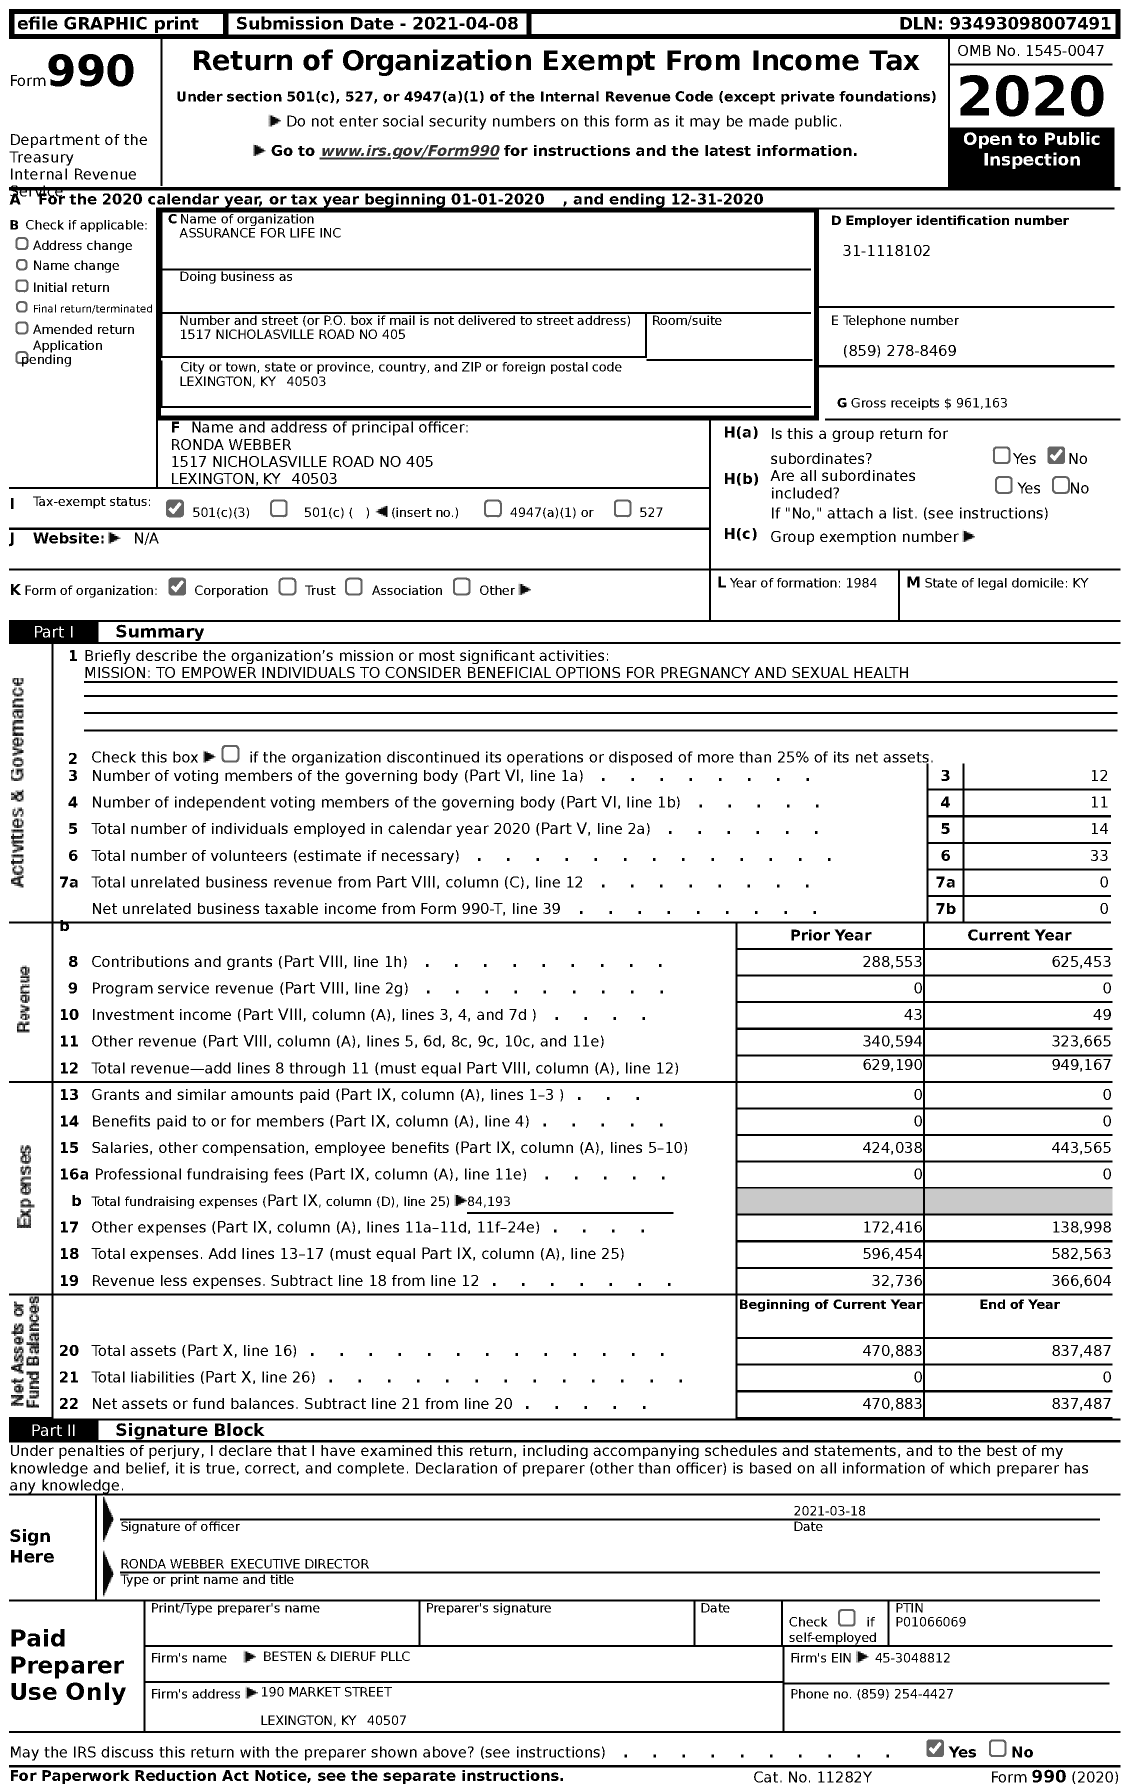 Image of first page of 2020 Form 990 for Assurance for Life